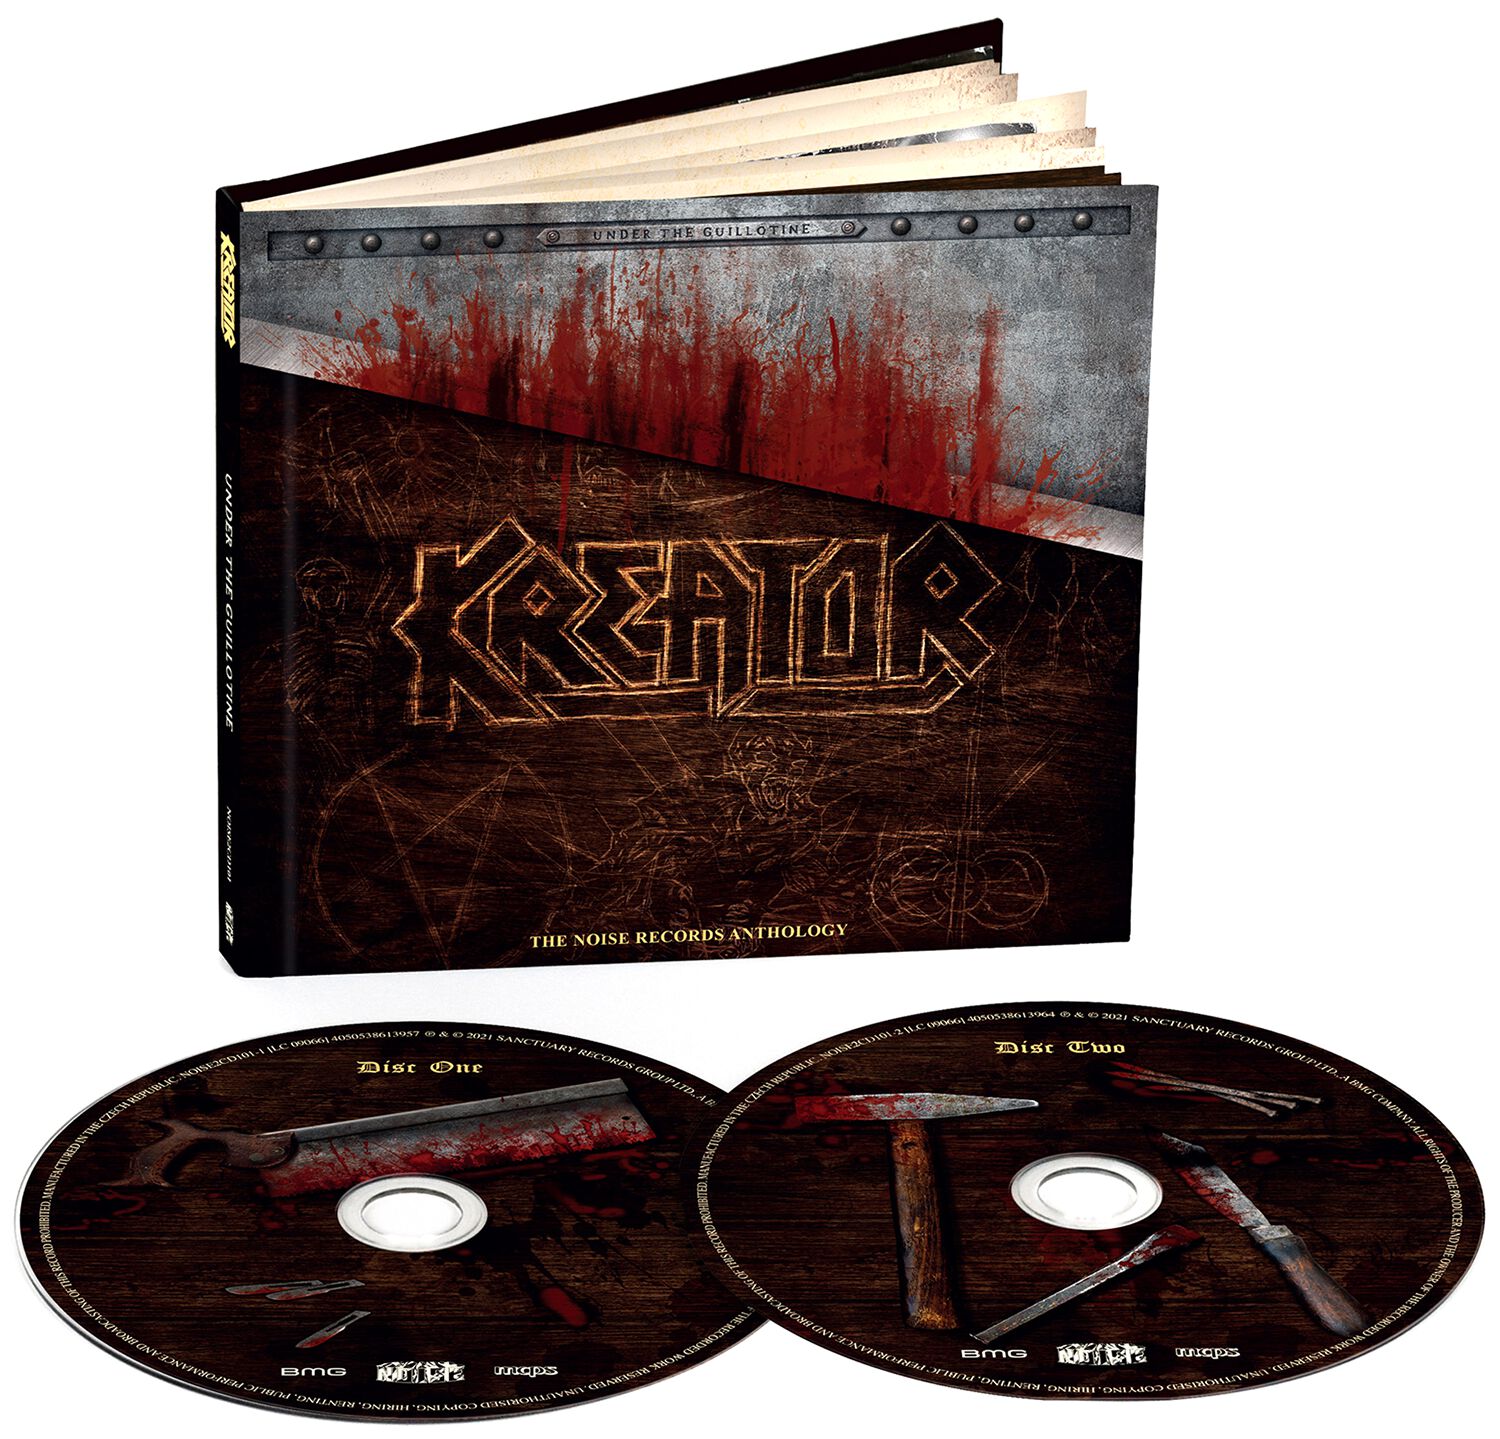 Image of Kreator Under the guillotine 2-CD Standard